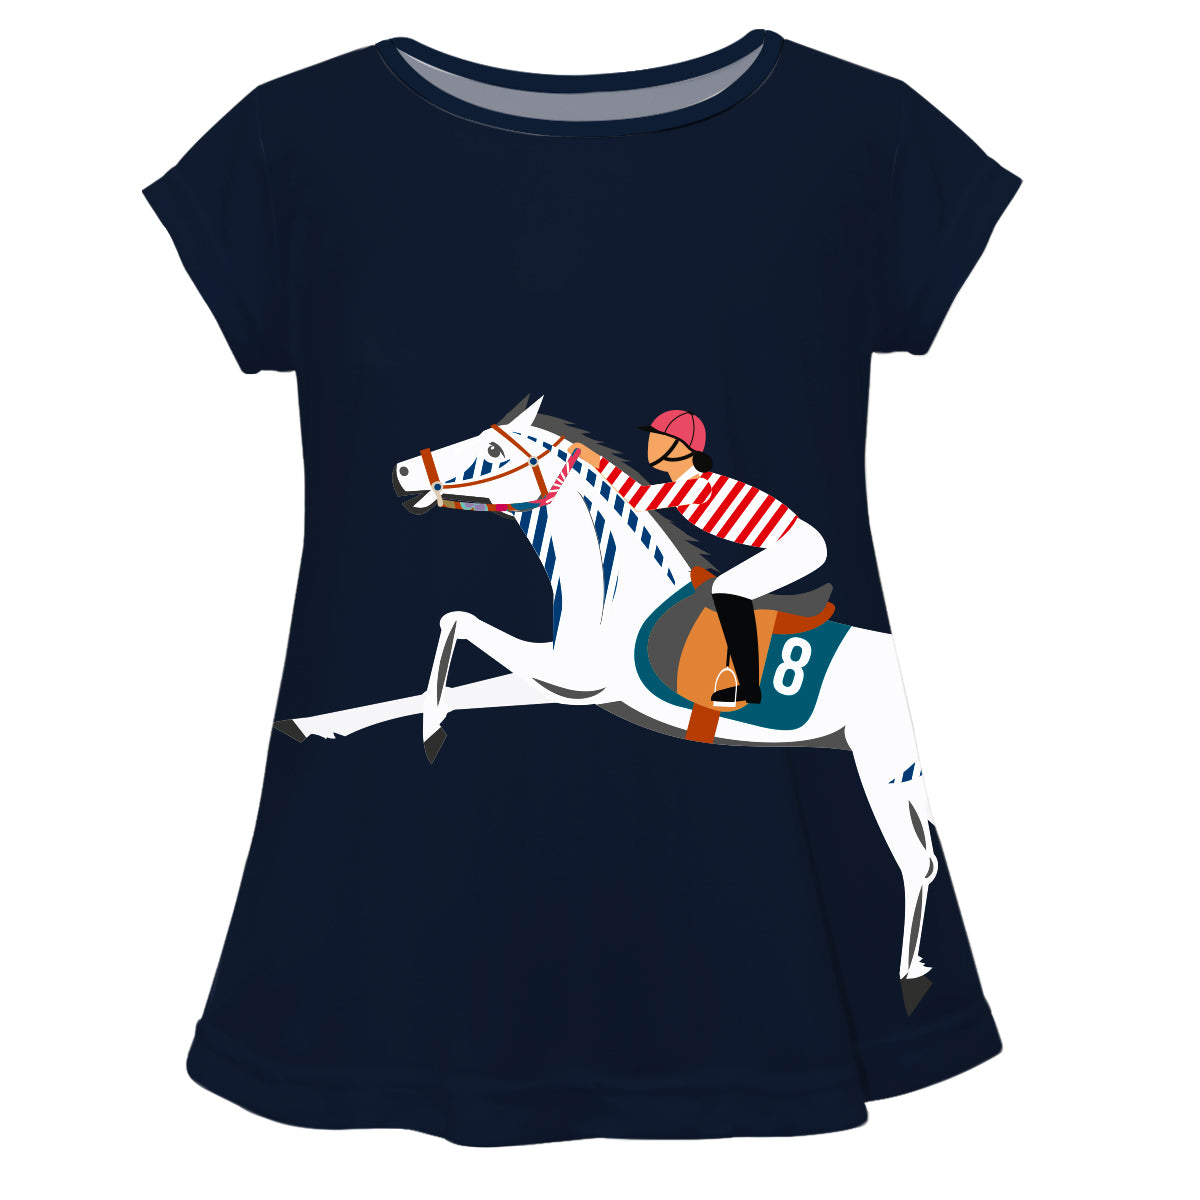 Navy equestrian girls blouse with horse and name - Wimziy&Co.